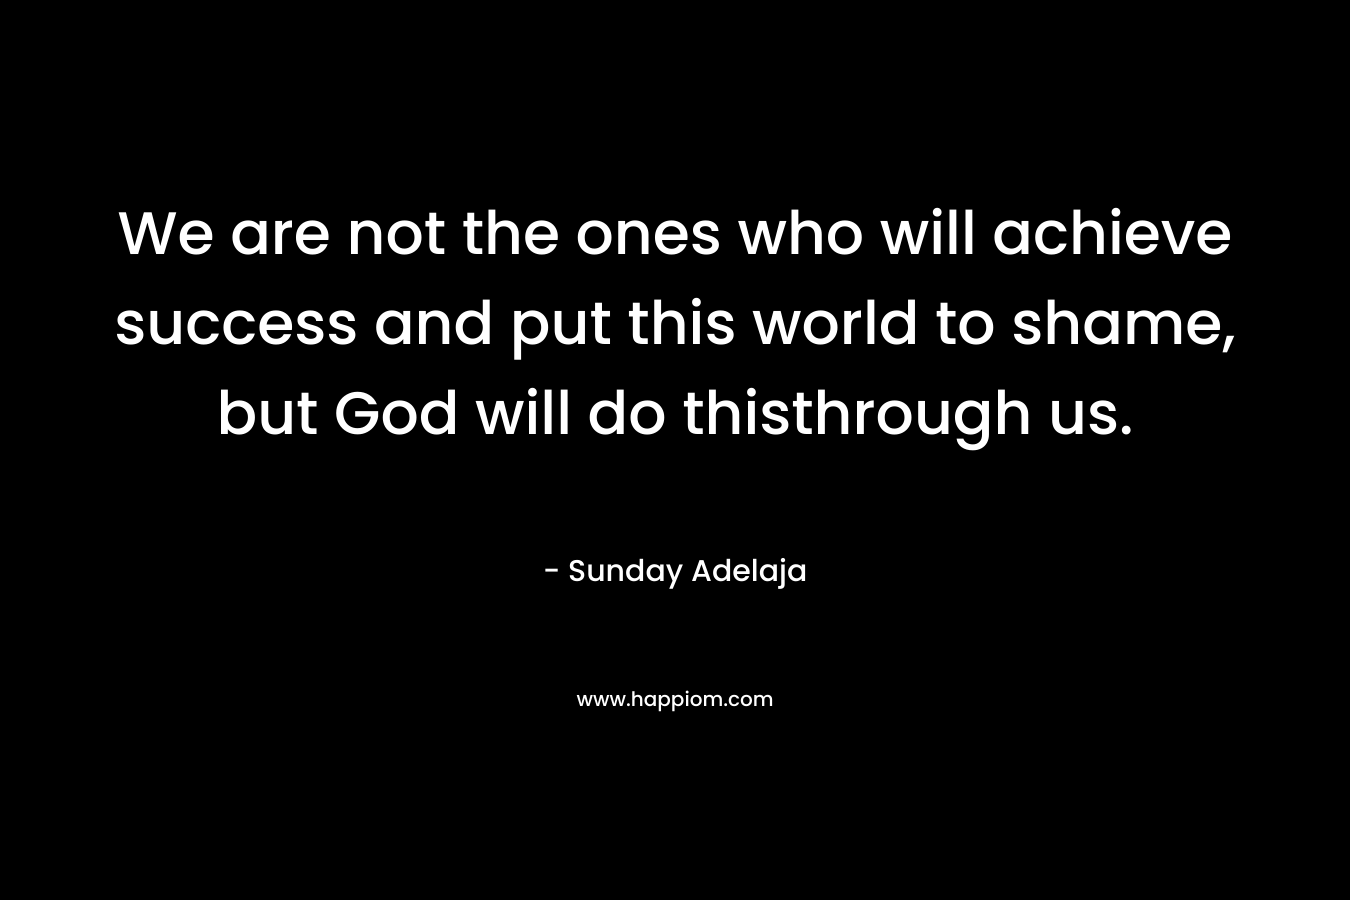 We are not the ones who will achieve success and put this world to shame, but God will do thisthrough us.